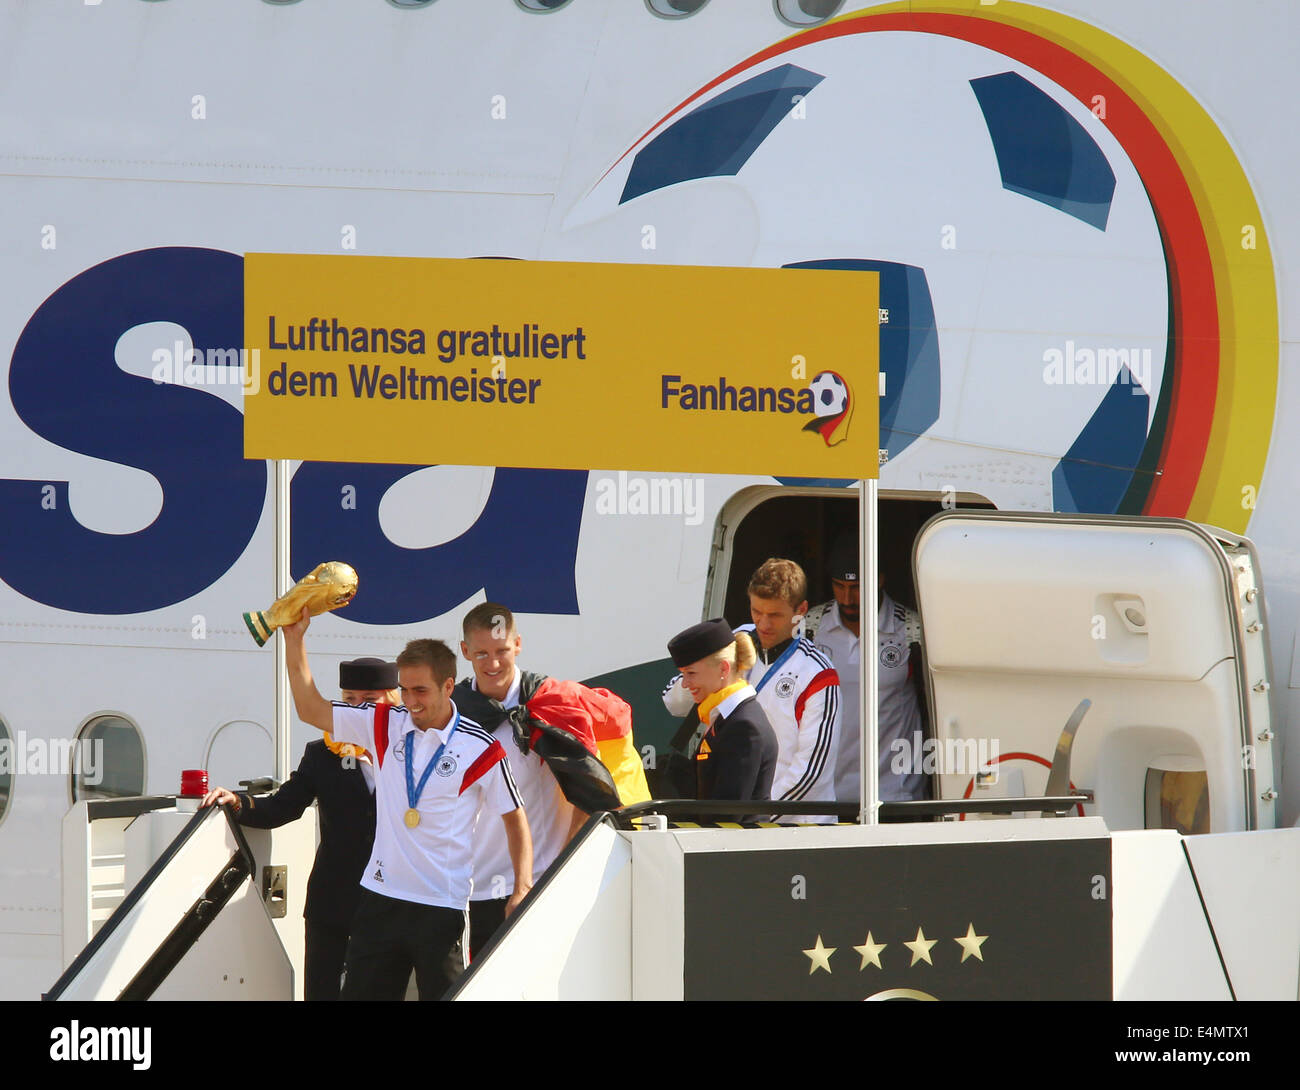 Berlin, Germany. 15th July, 2014. Germany's Philipp Lahm ( C), followed by his teammates Bastian Schweinsteiger and Thomas Mueller (R), step out of the aircraft holding the World Cup trophy in his hands as Germany's national soccer squad arrives at Tegel airport in Berlin, Germany, 15 July 2014. Team Germany won the Brazil 2014 FIFA Soccer World Cup final against Argentina by 1-0, winning the World Champion title for the fourth time after the 1954, 1974 and 1990 World Cups. PHOTO: JENS BUETTNER/dpa/Alamy Live News Stock Photo